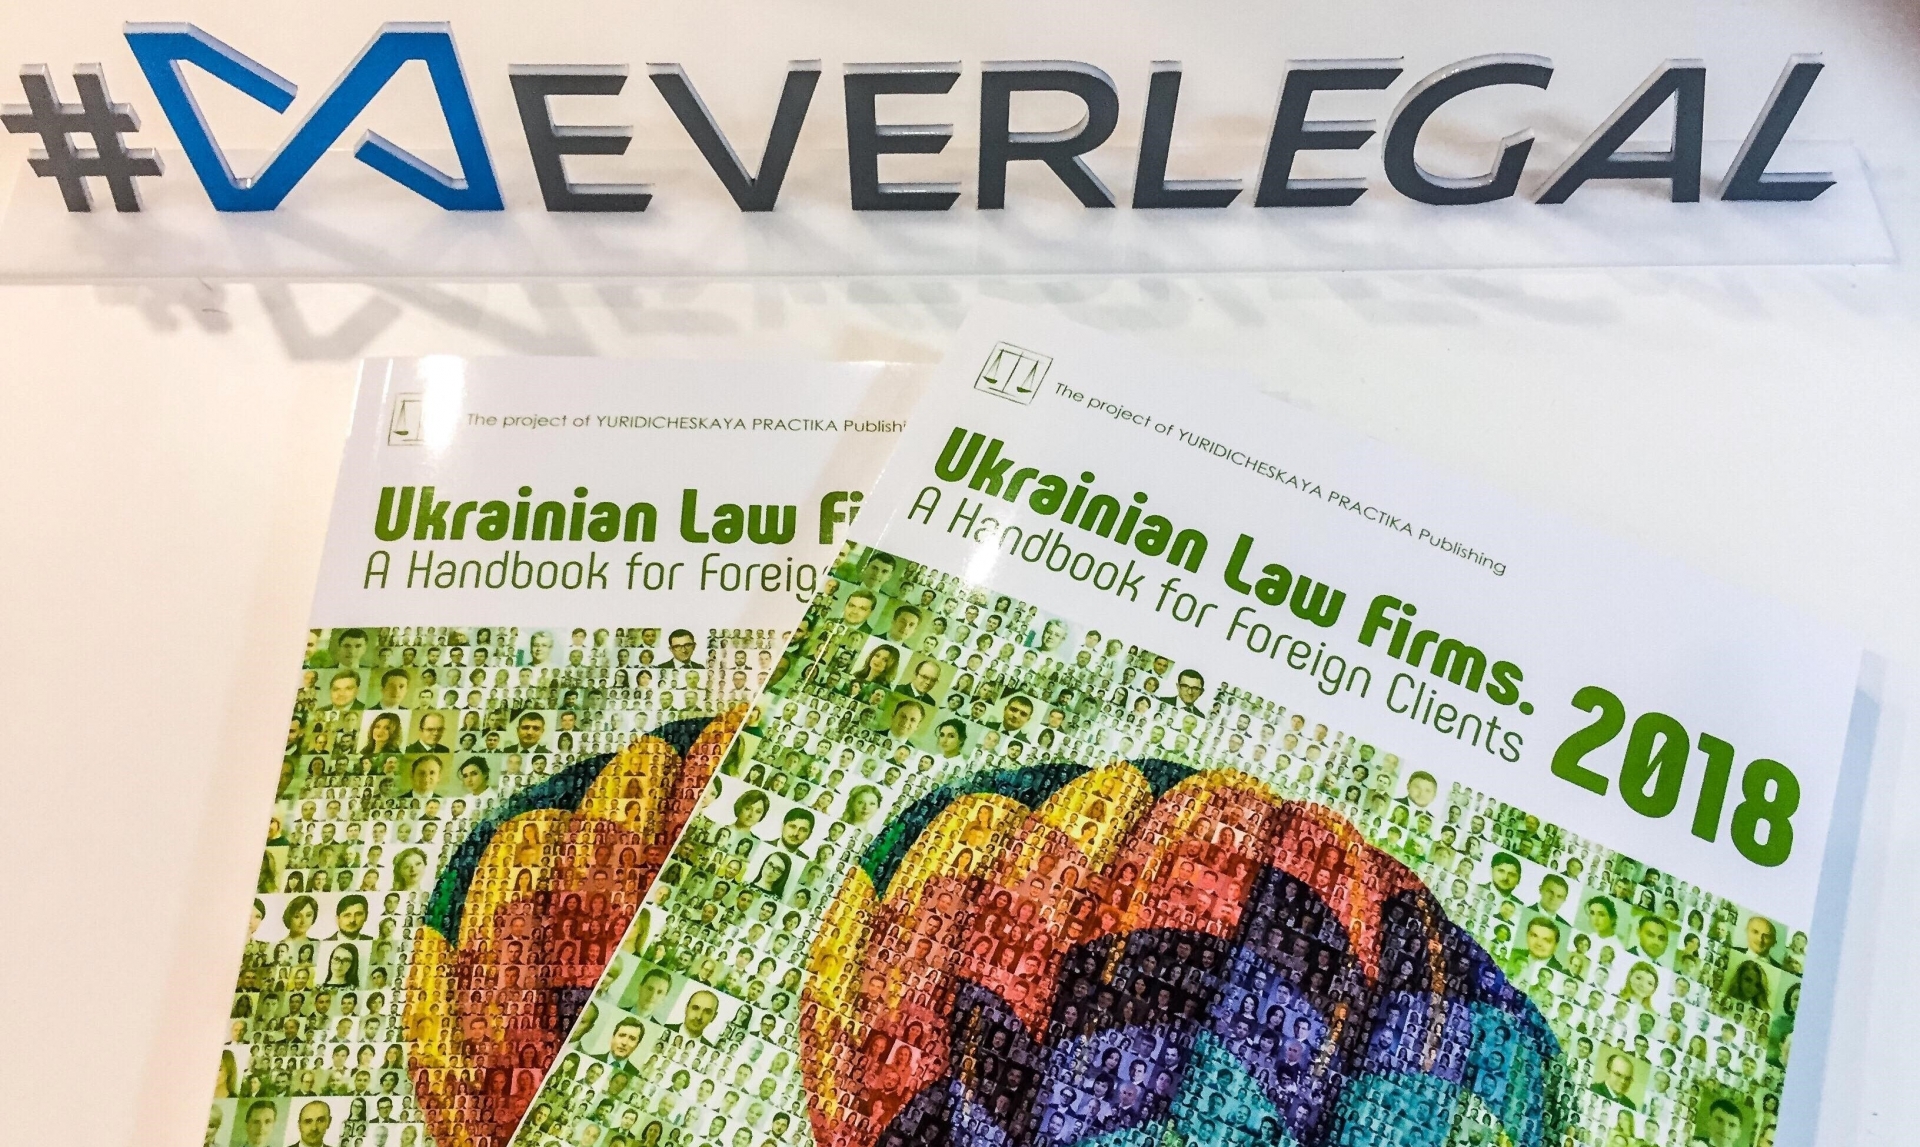 EVERLEGAL is recommended by the Ukrainian Law Firms 2018